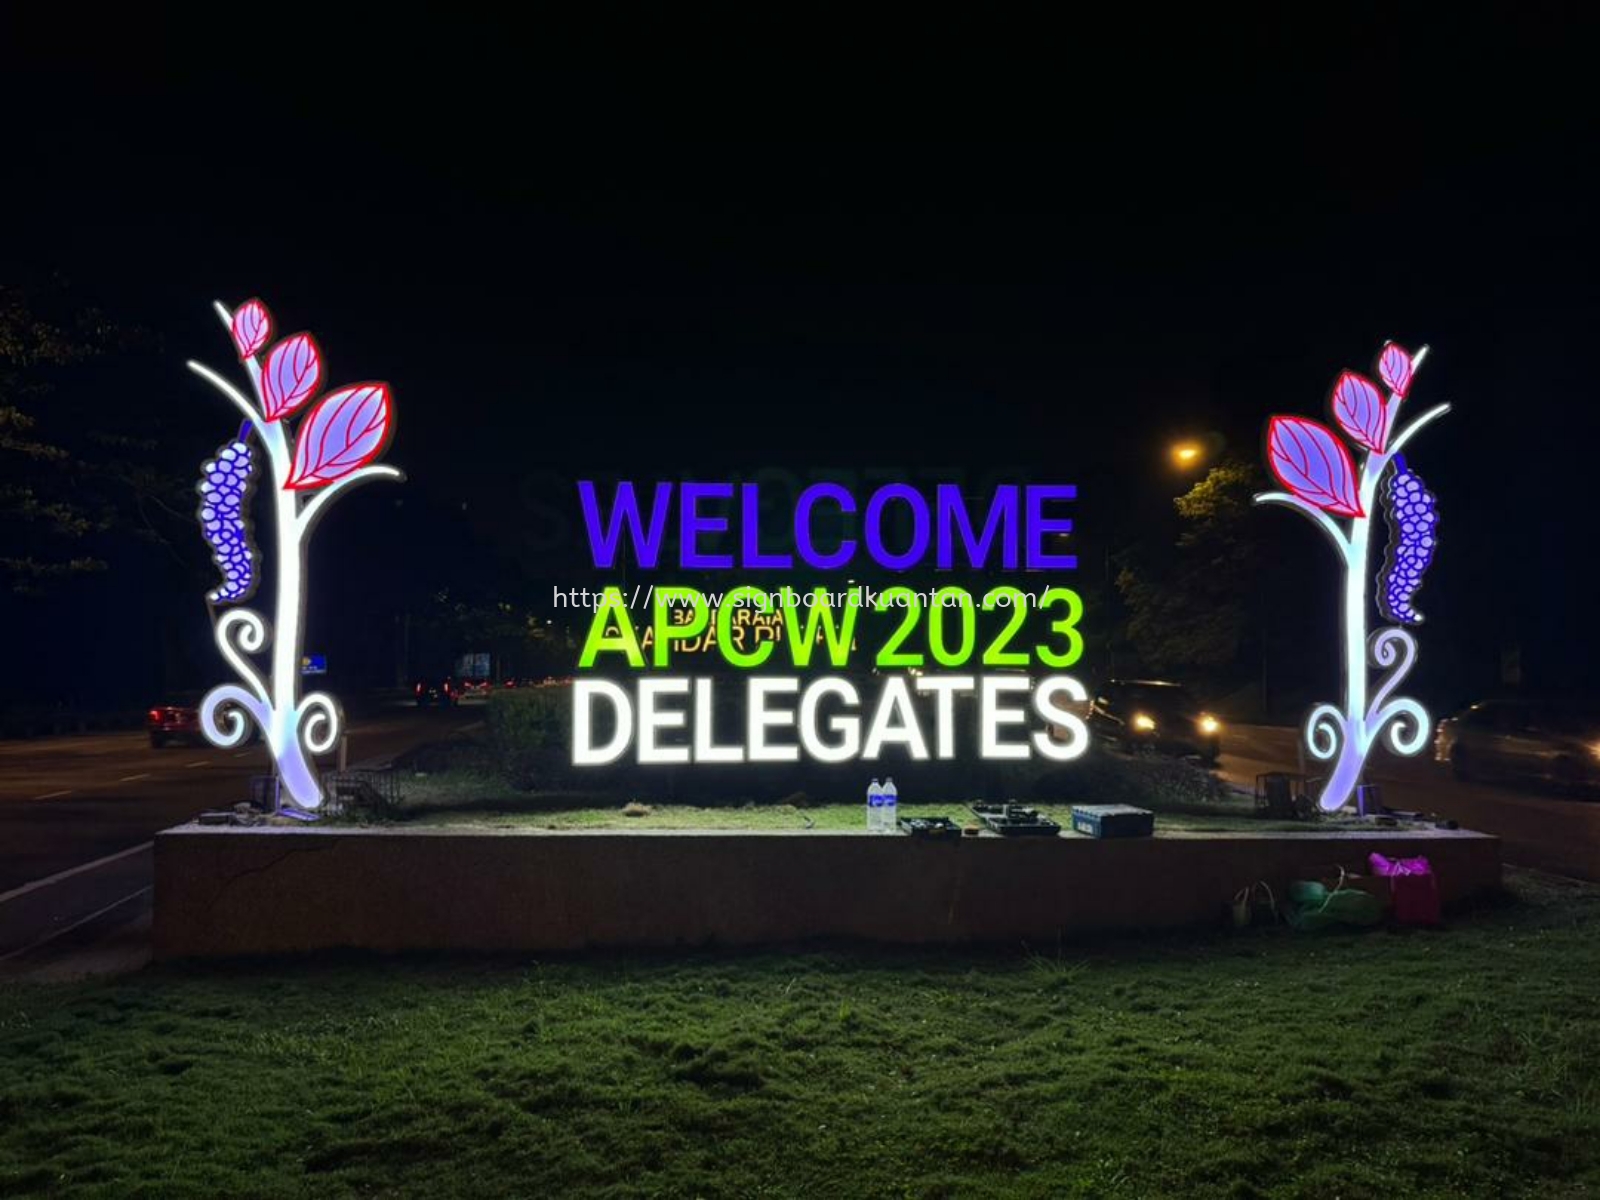 WELCOME APCW 2023 DELEGATES ALUMINIUM CONCEAL BIG 3D LED BOX UP LETTERING STAND SIGNAGE AT